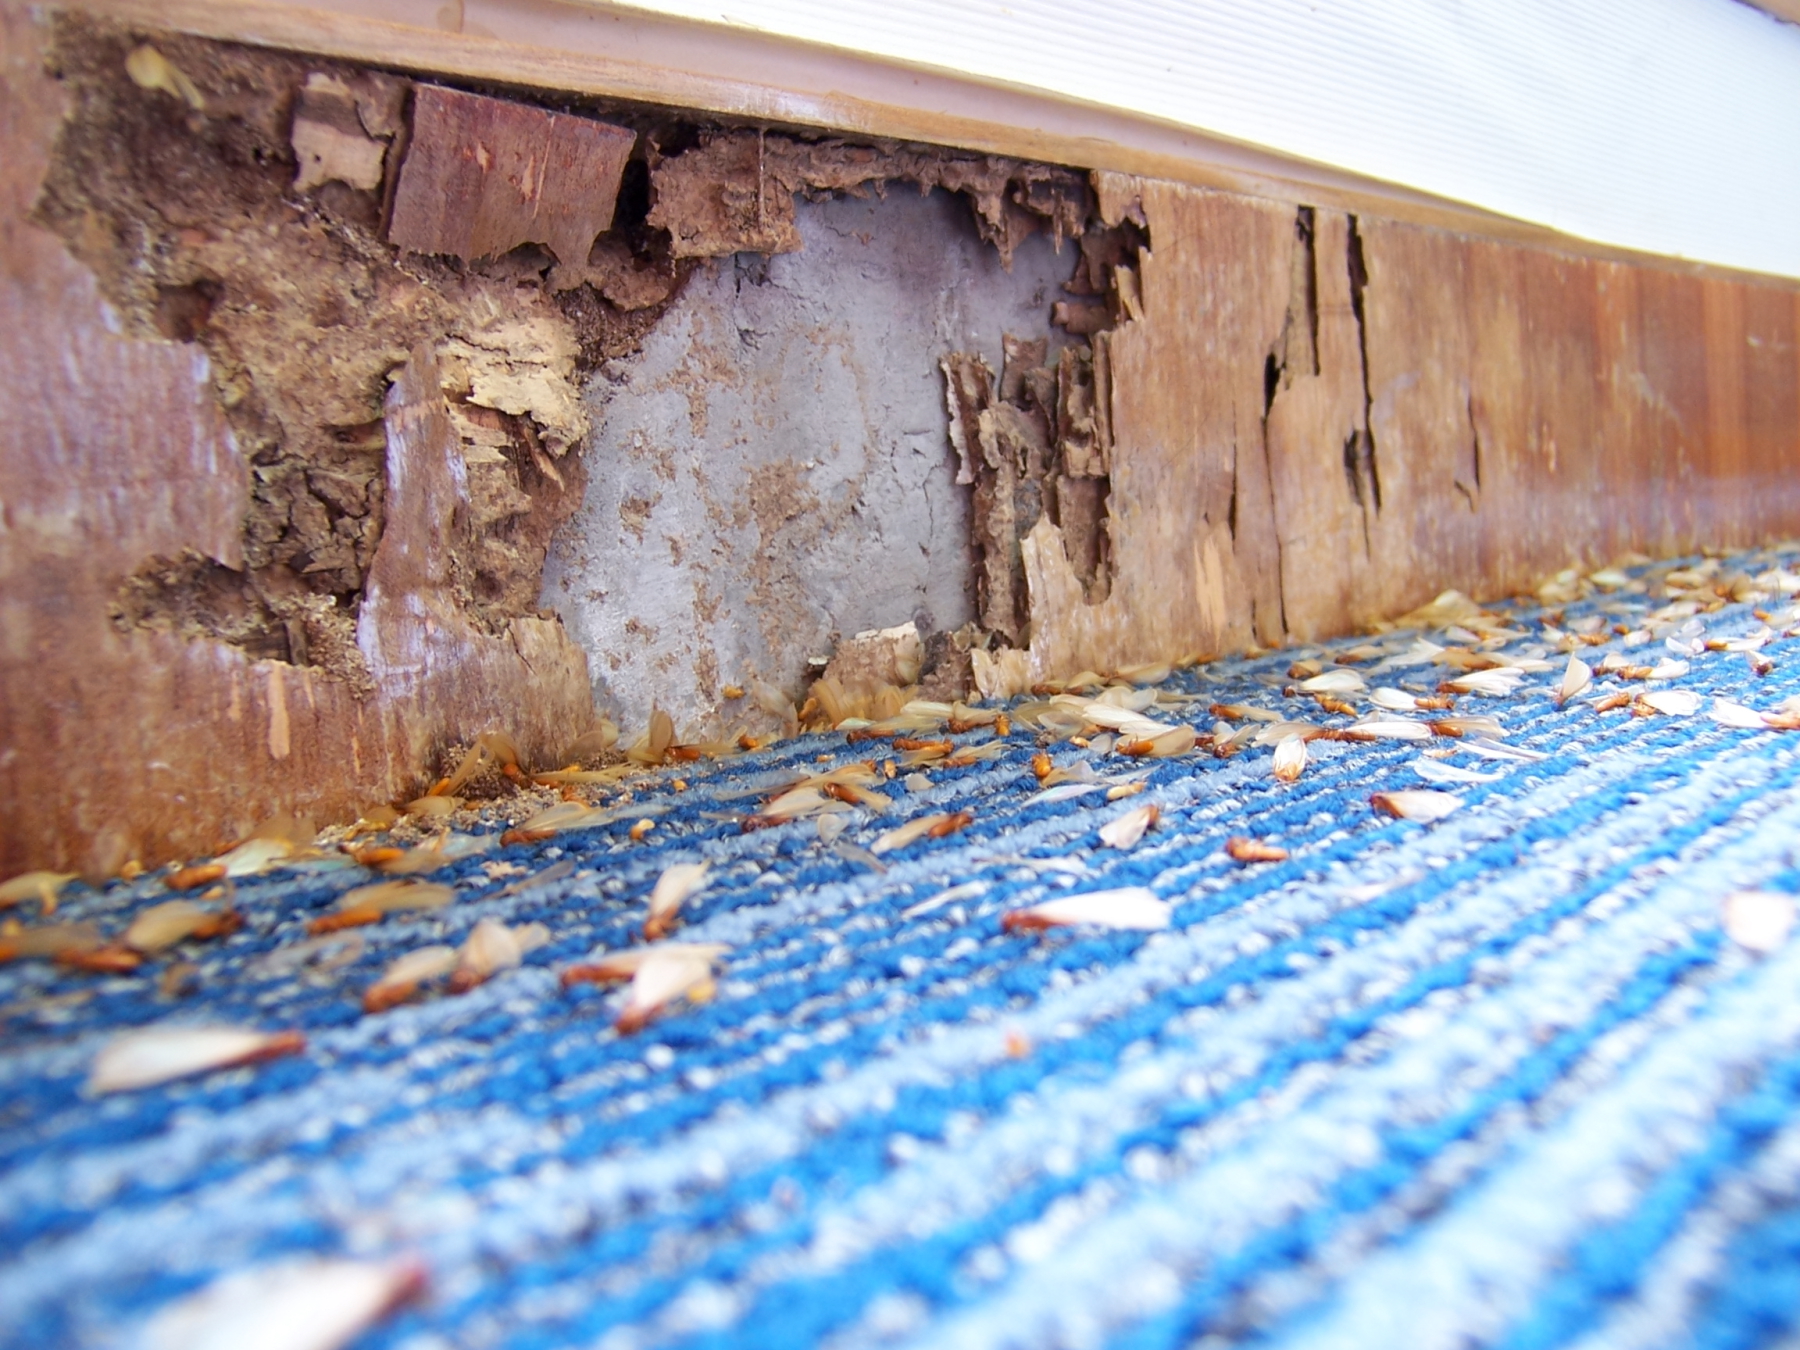 Termite infestation: Wooden panel eaten up by termites.